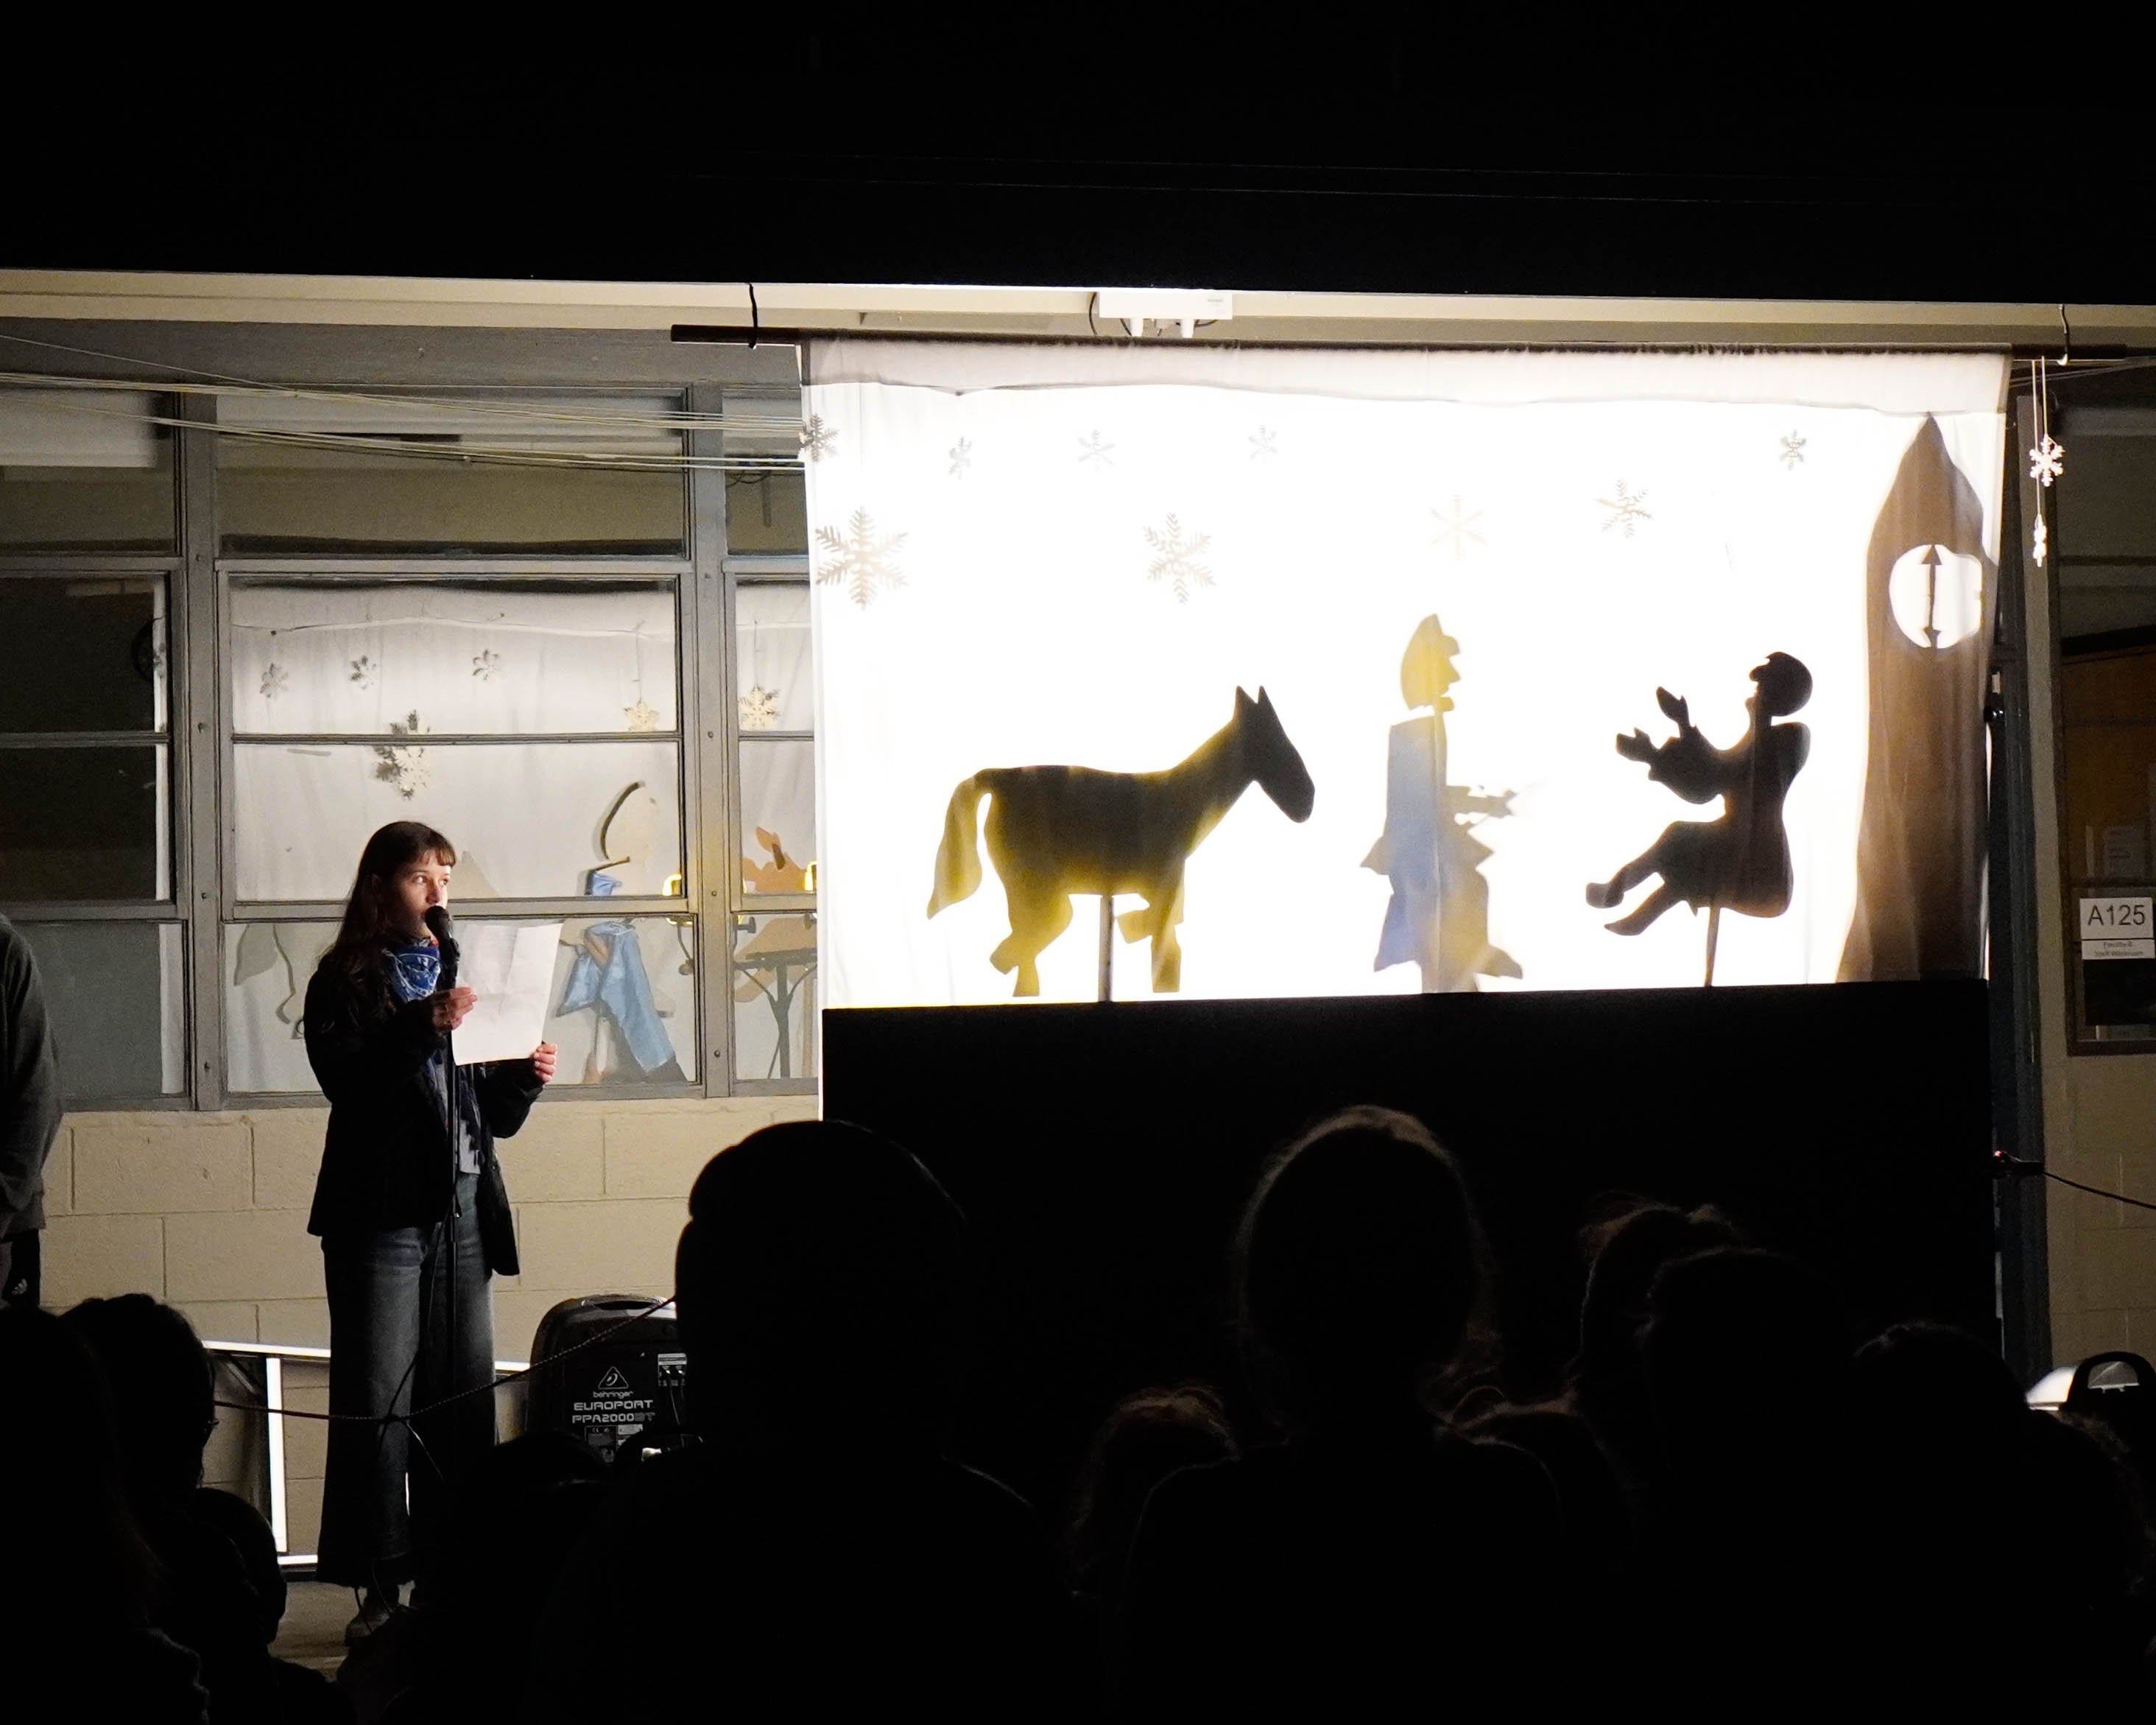 Upper School students and faculty putting on a shadow puppet play telling the story of St. Martin.